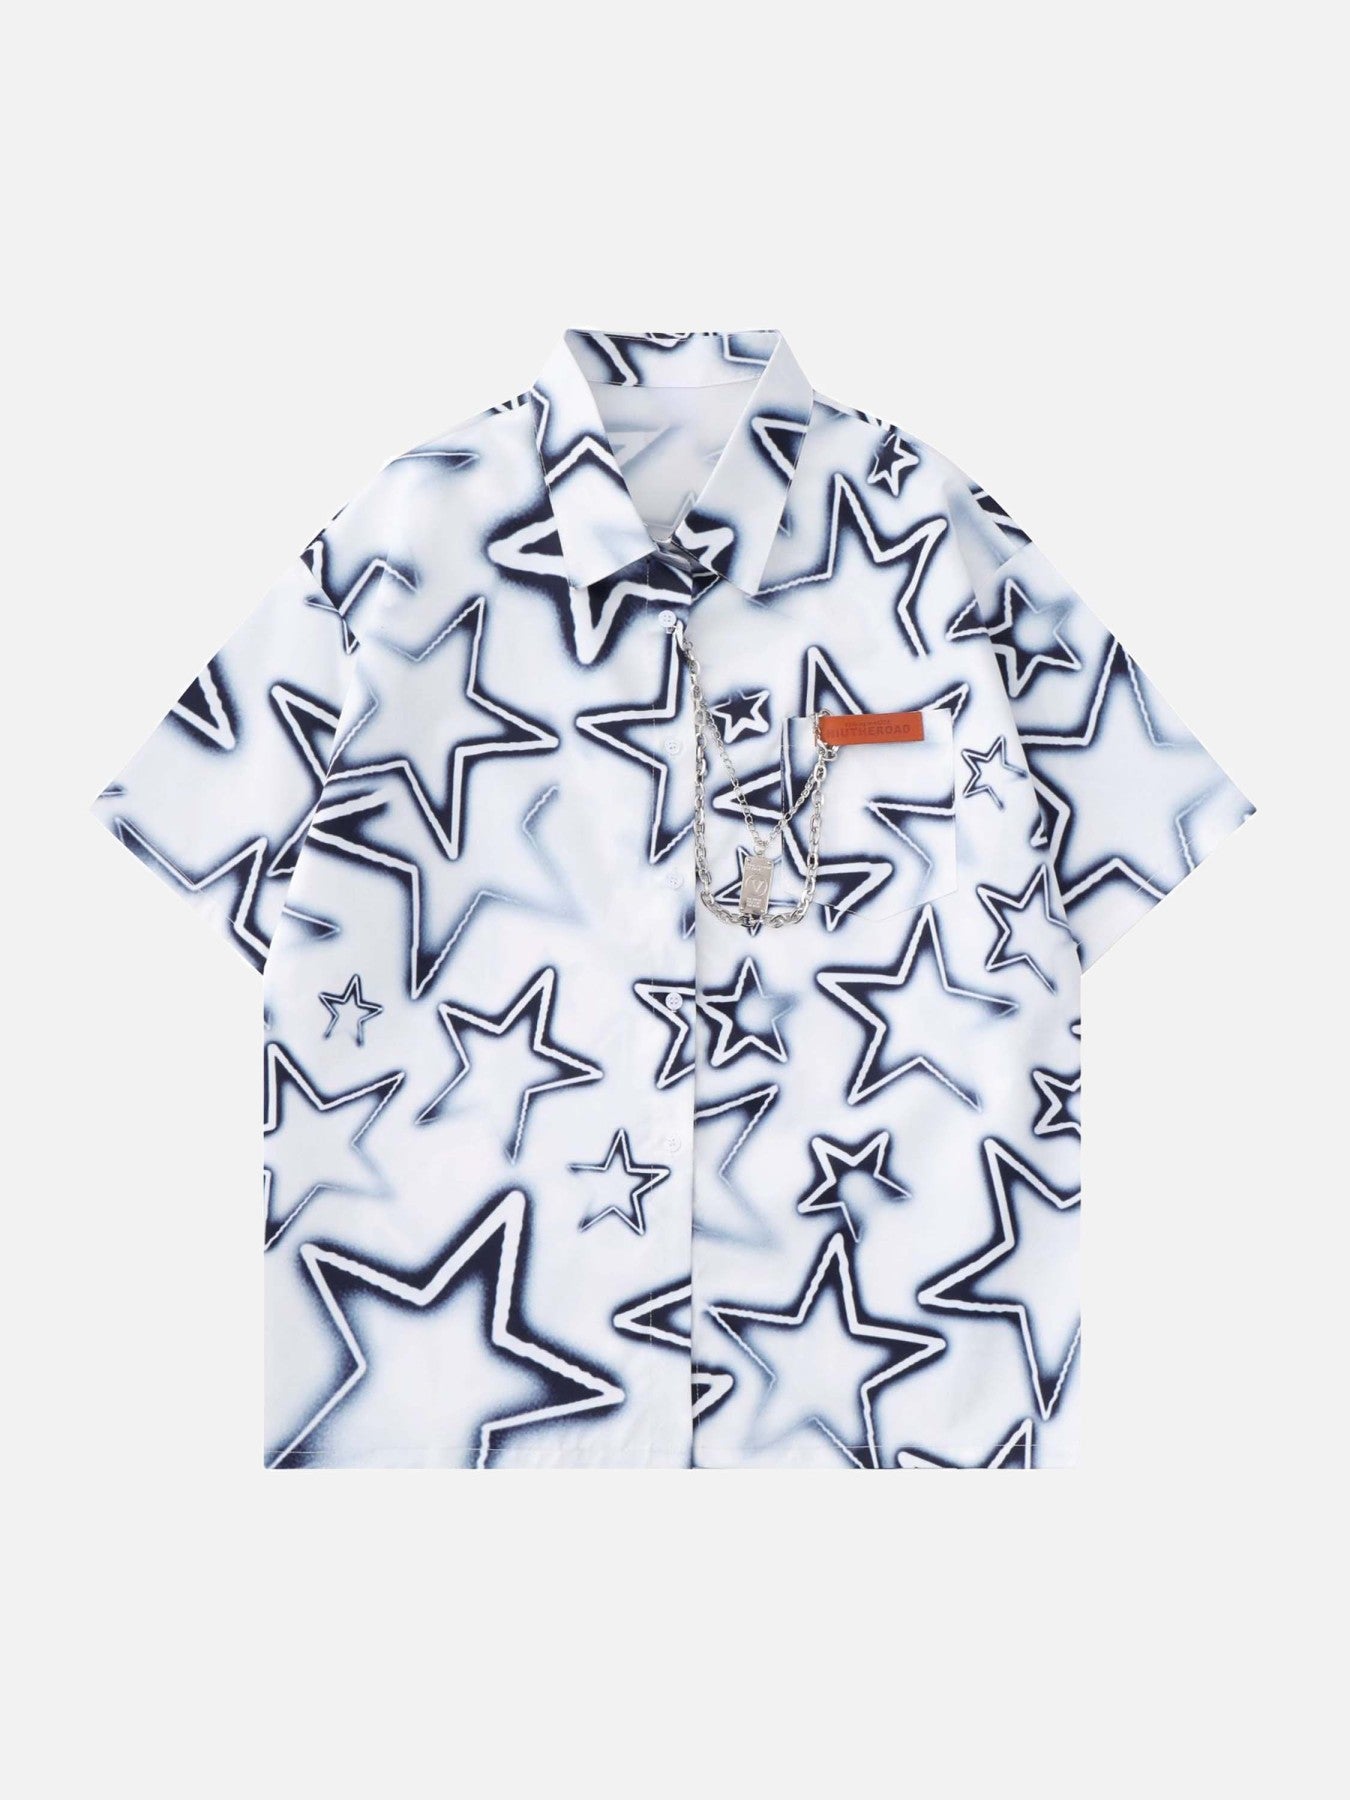 Thesupermade Chain Decorated Star Shirt